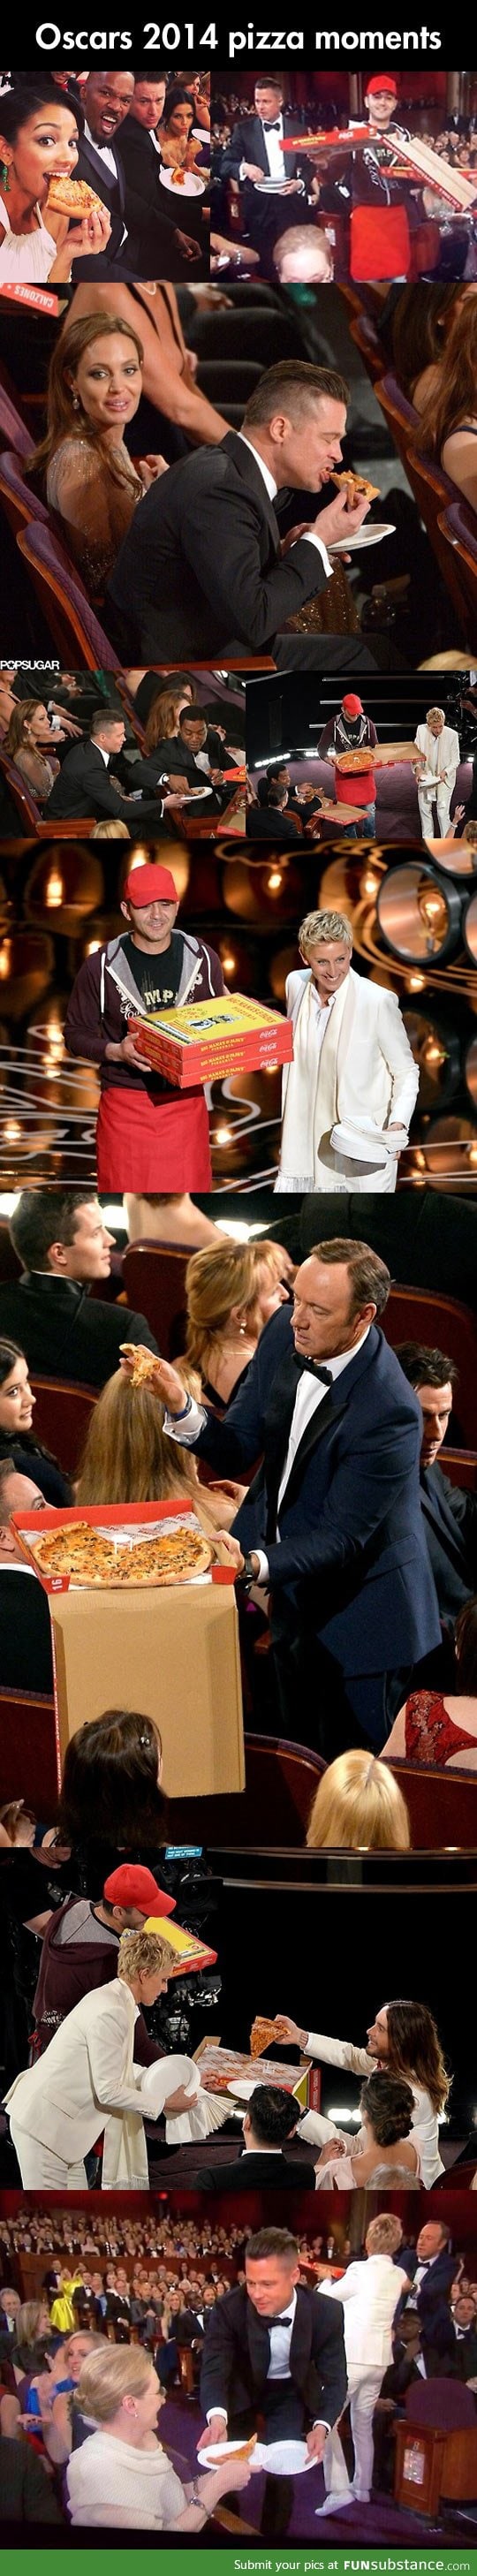 Pizza party at the Oscars